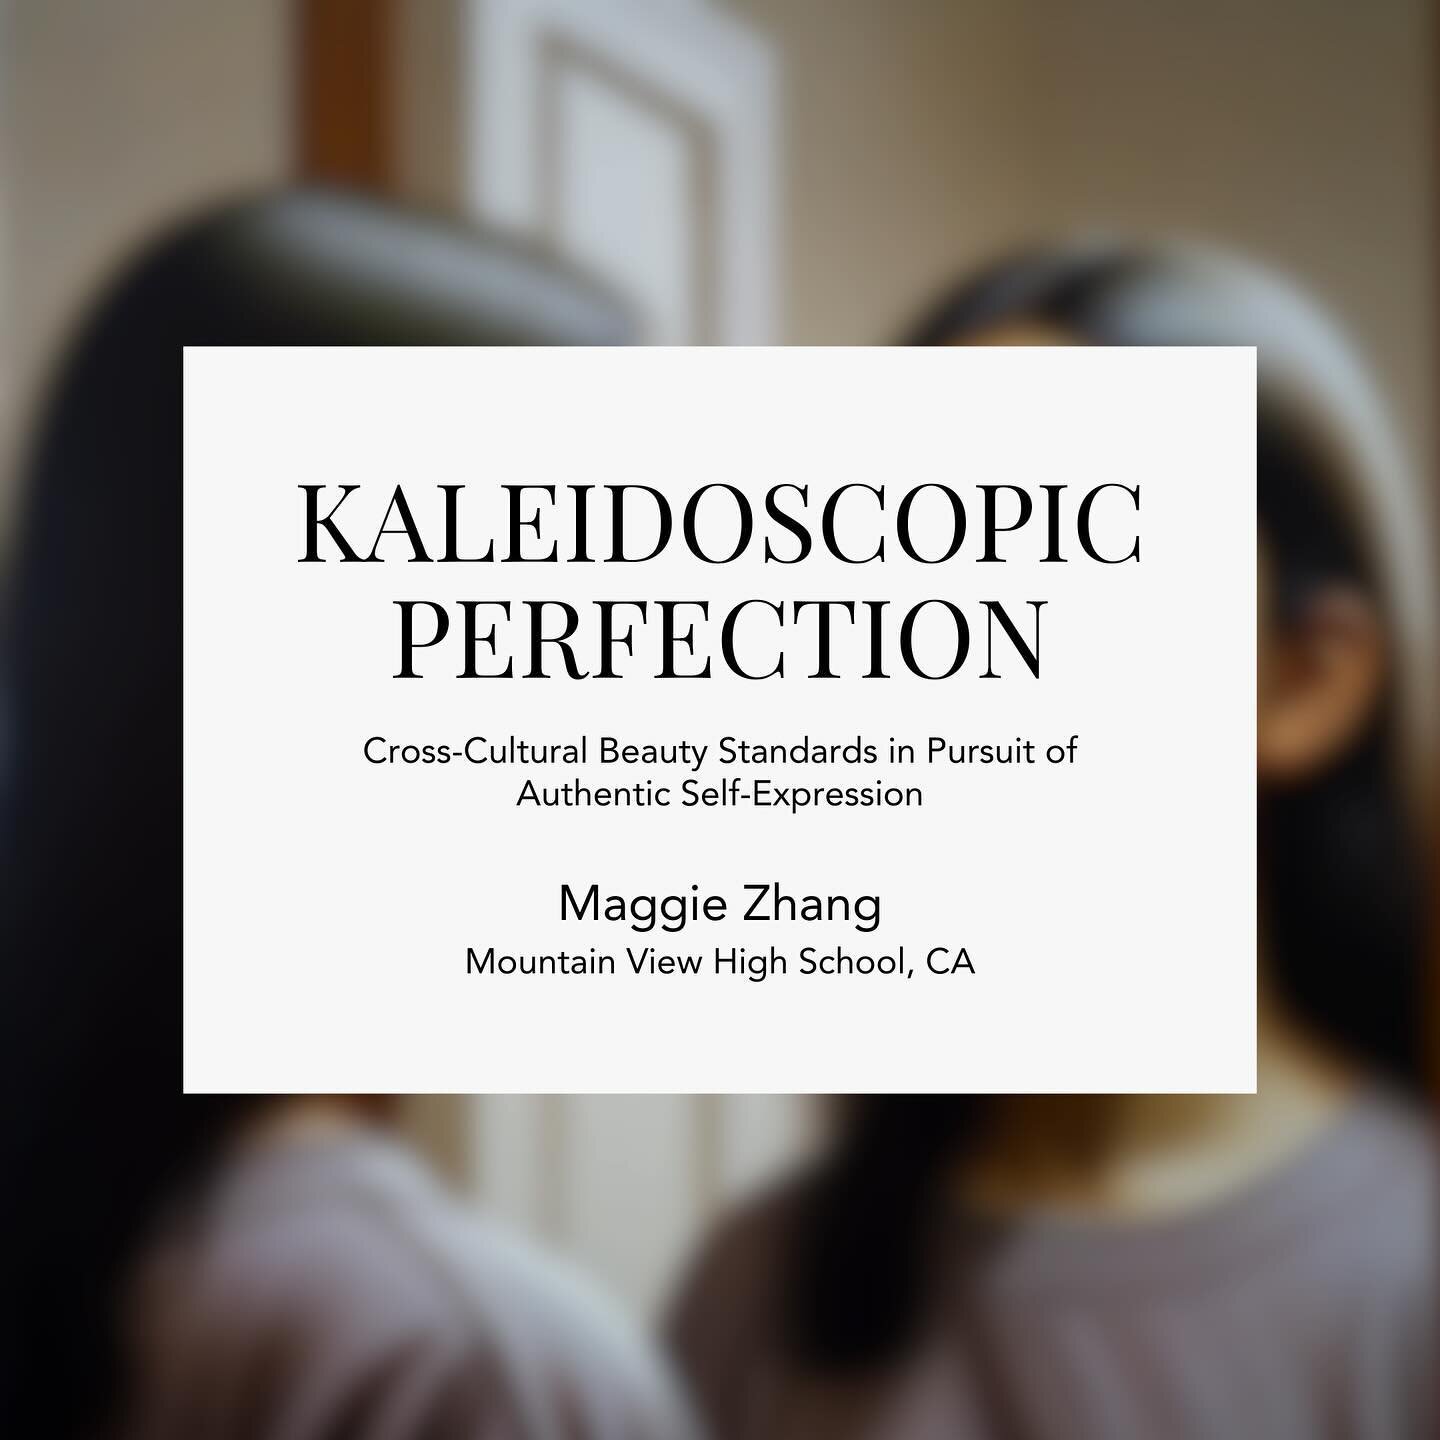 What makes us beautiful? What makes us authentic? Maggie explores these questions in her article, Kaleidoscopic Perfection. Read her article in our January issue at culturator.org/issues 
(@maggir_zhang) 
.
.
.
#CulturatorCraftsChange